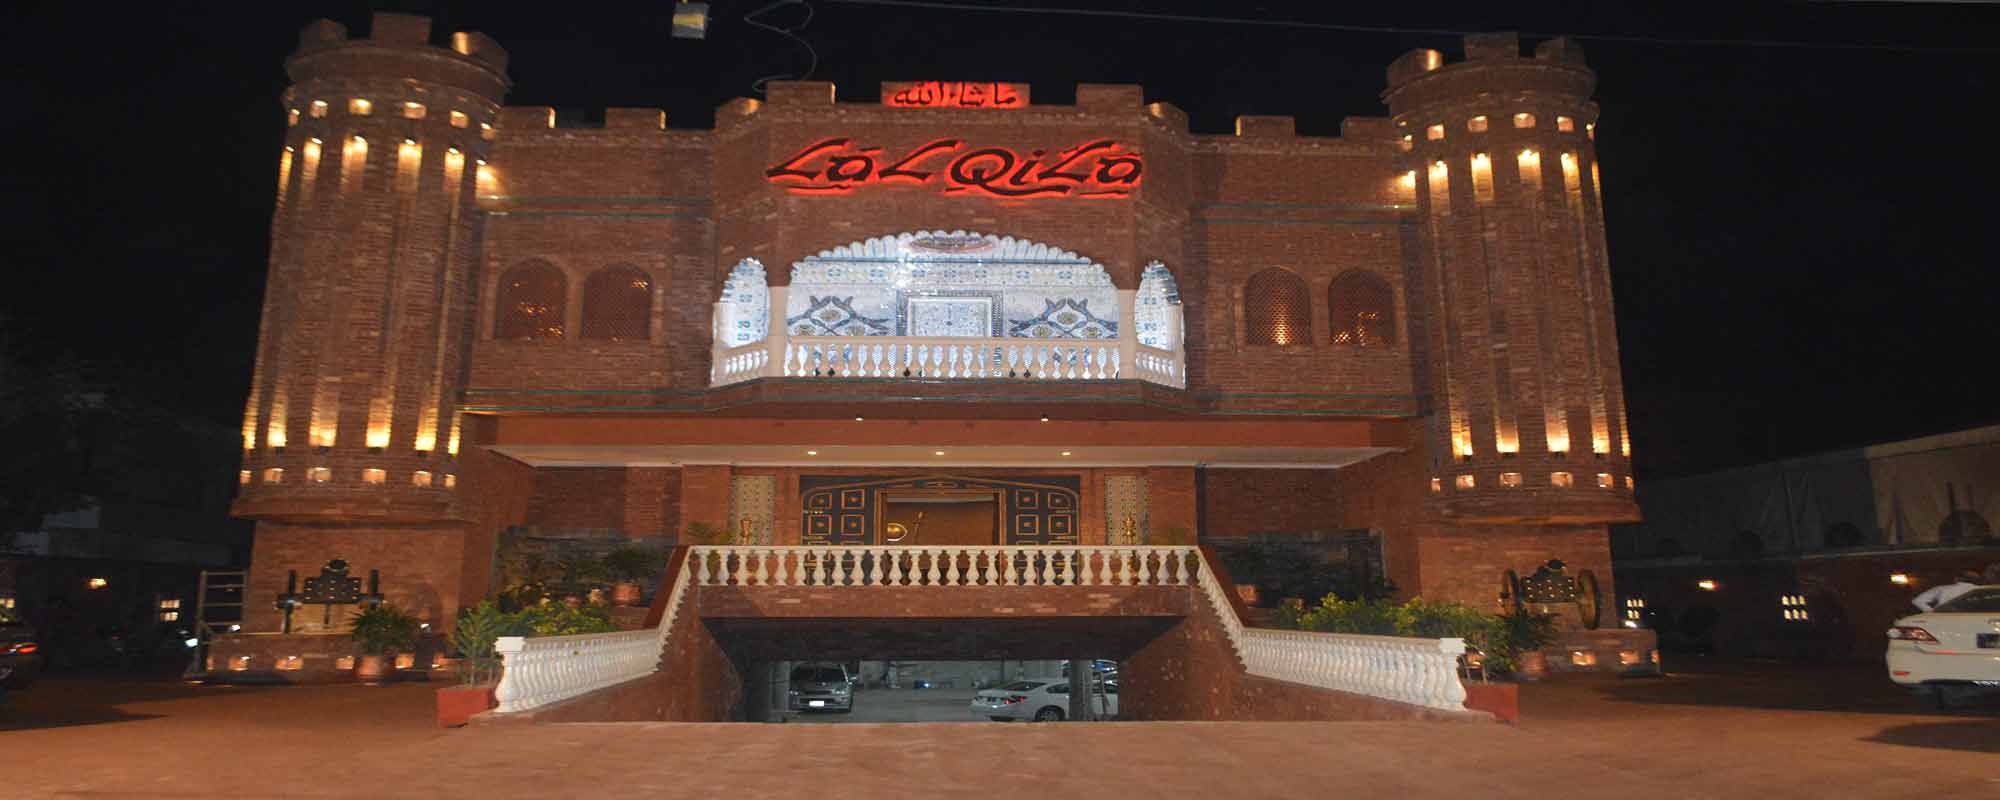 Front view of Lal Qila restaurant in Lahore